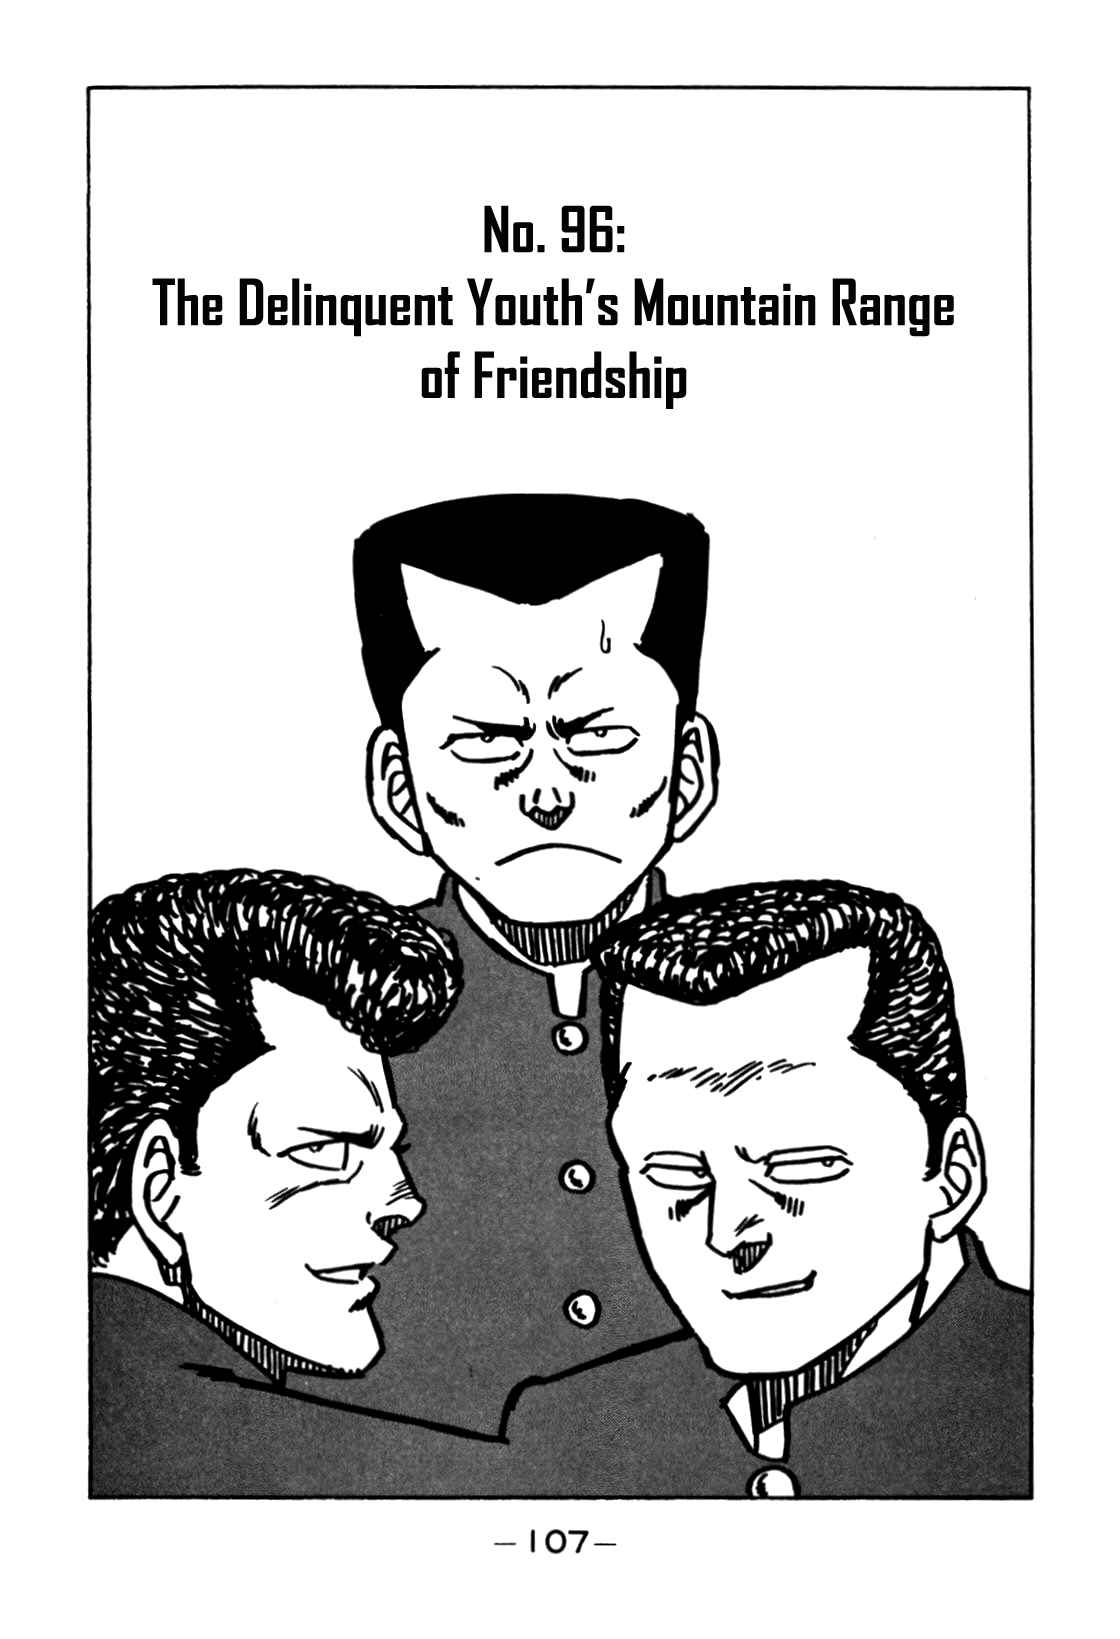 Be Bop High School Vol. 11 Ch. 96 The Delinquent Youth's Mountain Range of Friendship